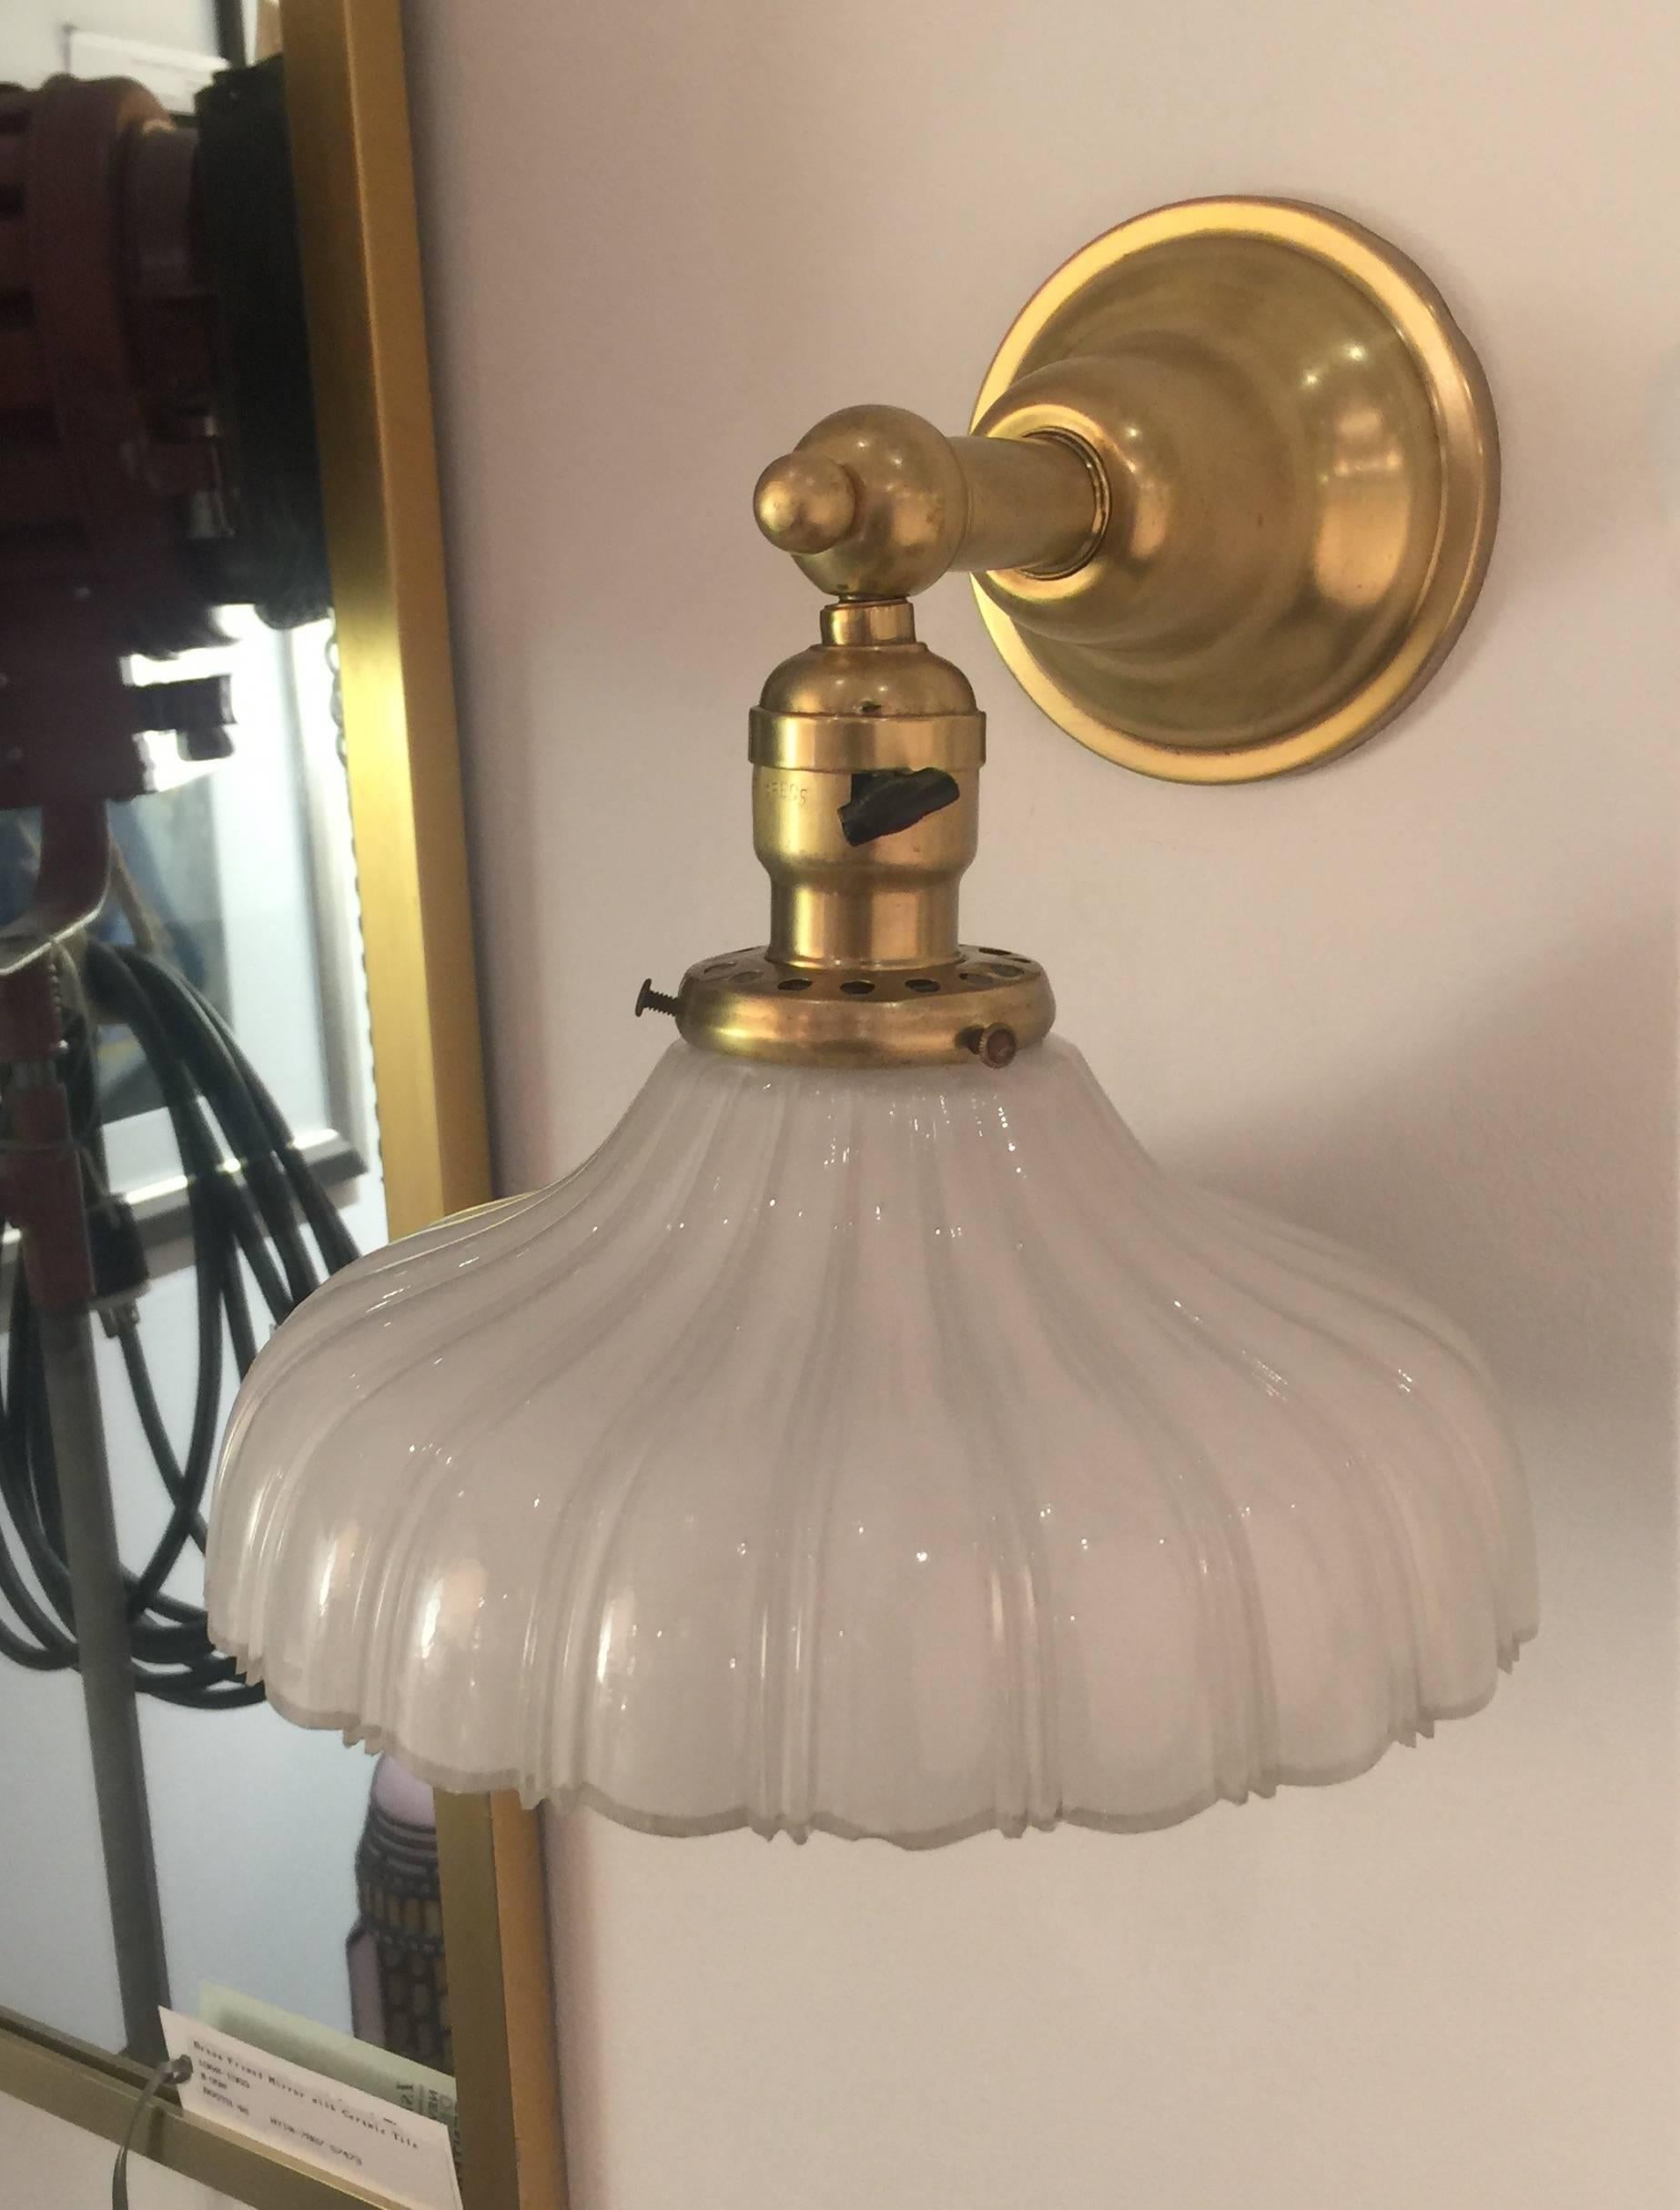 Pair of vintage brass wall lights with period scalloped milk glass shades, USA, circa 1930. Wall lights and shades are both vintage.

Restored and rewired with new sockets and wiring. Original vintage wall bracket, black on/off switch and shade.